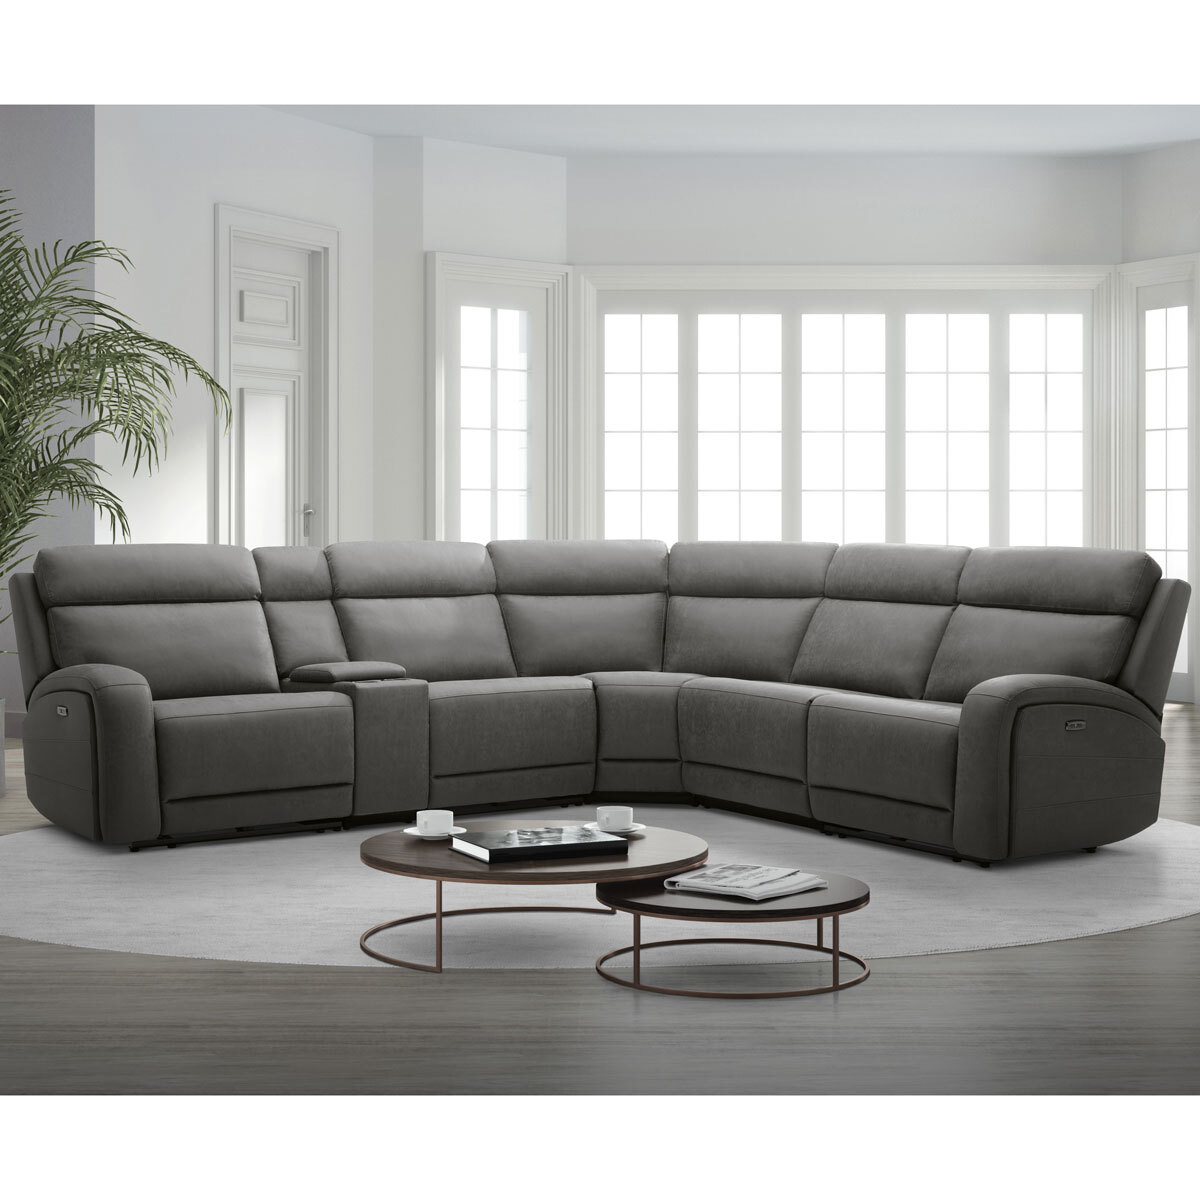 Gilman Creek Paisley Fabric Power, Grey Fabric Sectional Sofa With Recliner And Chaise Lounge Chair